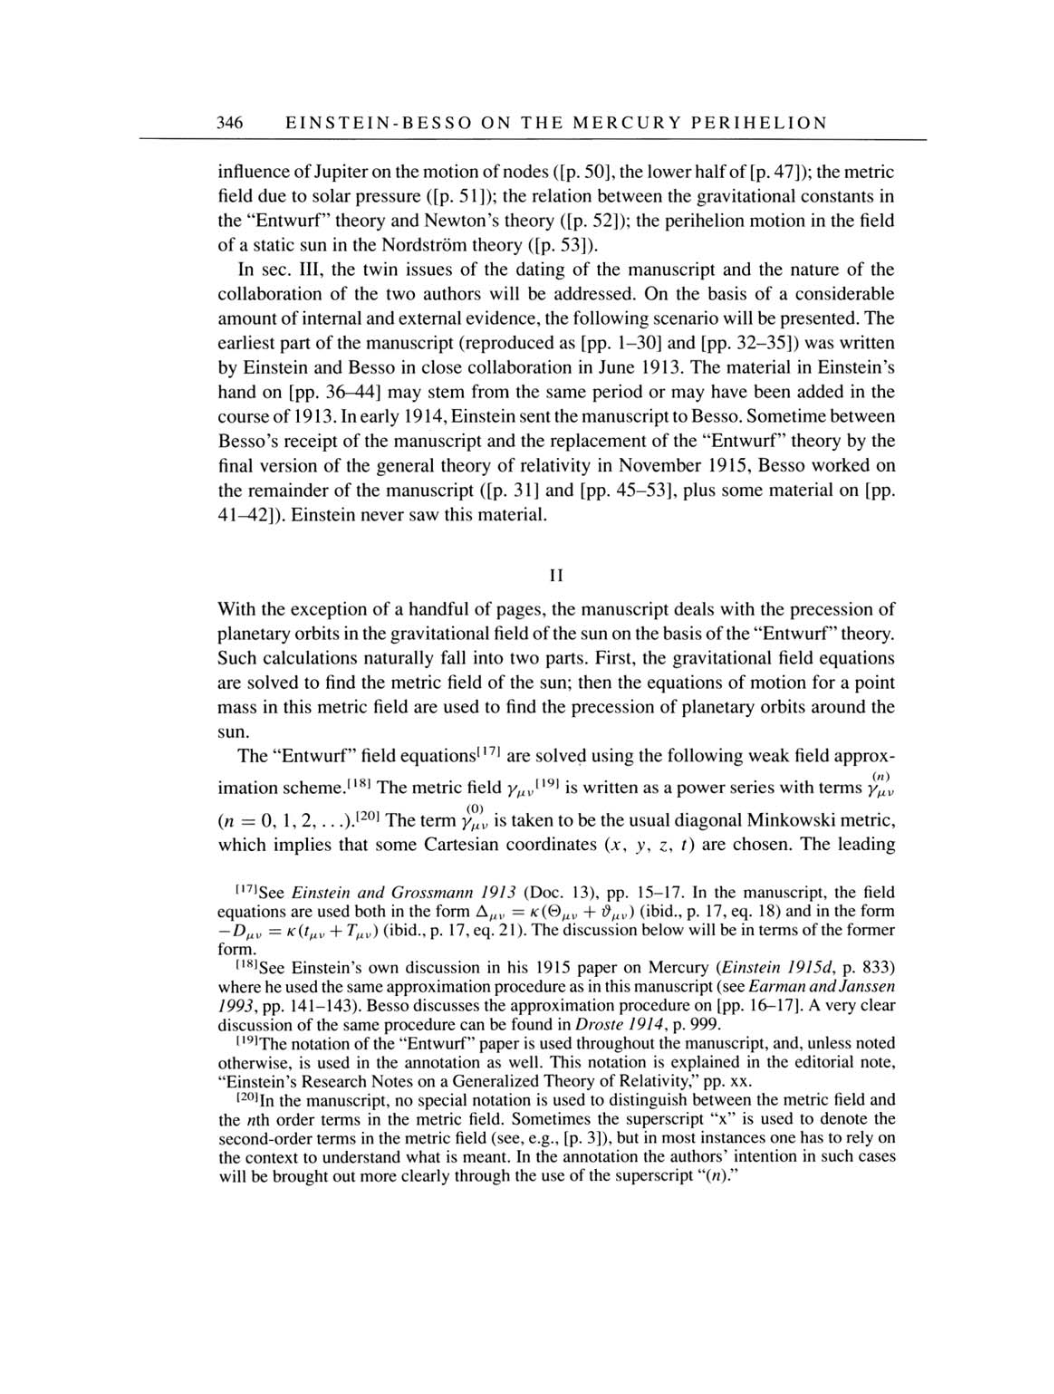 Volume 4: The Swiss Years: Writings 1912-1914 page 346